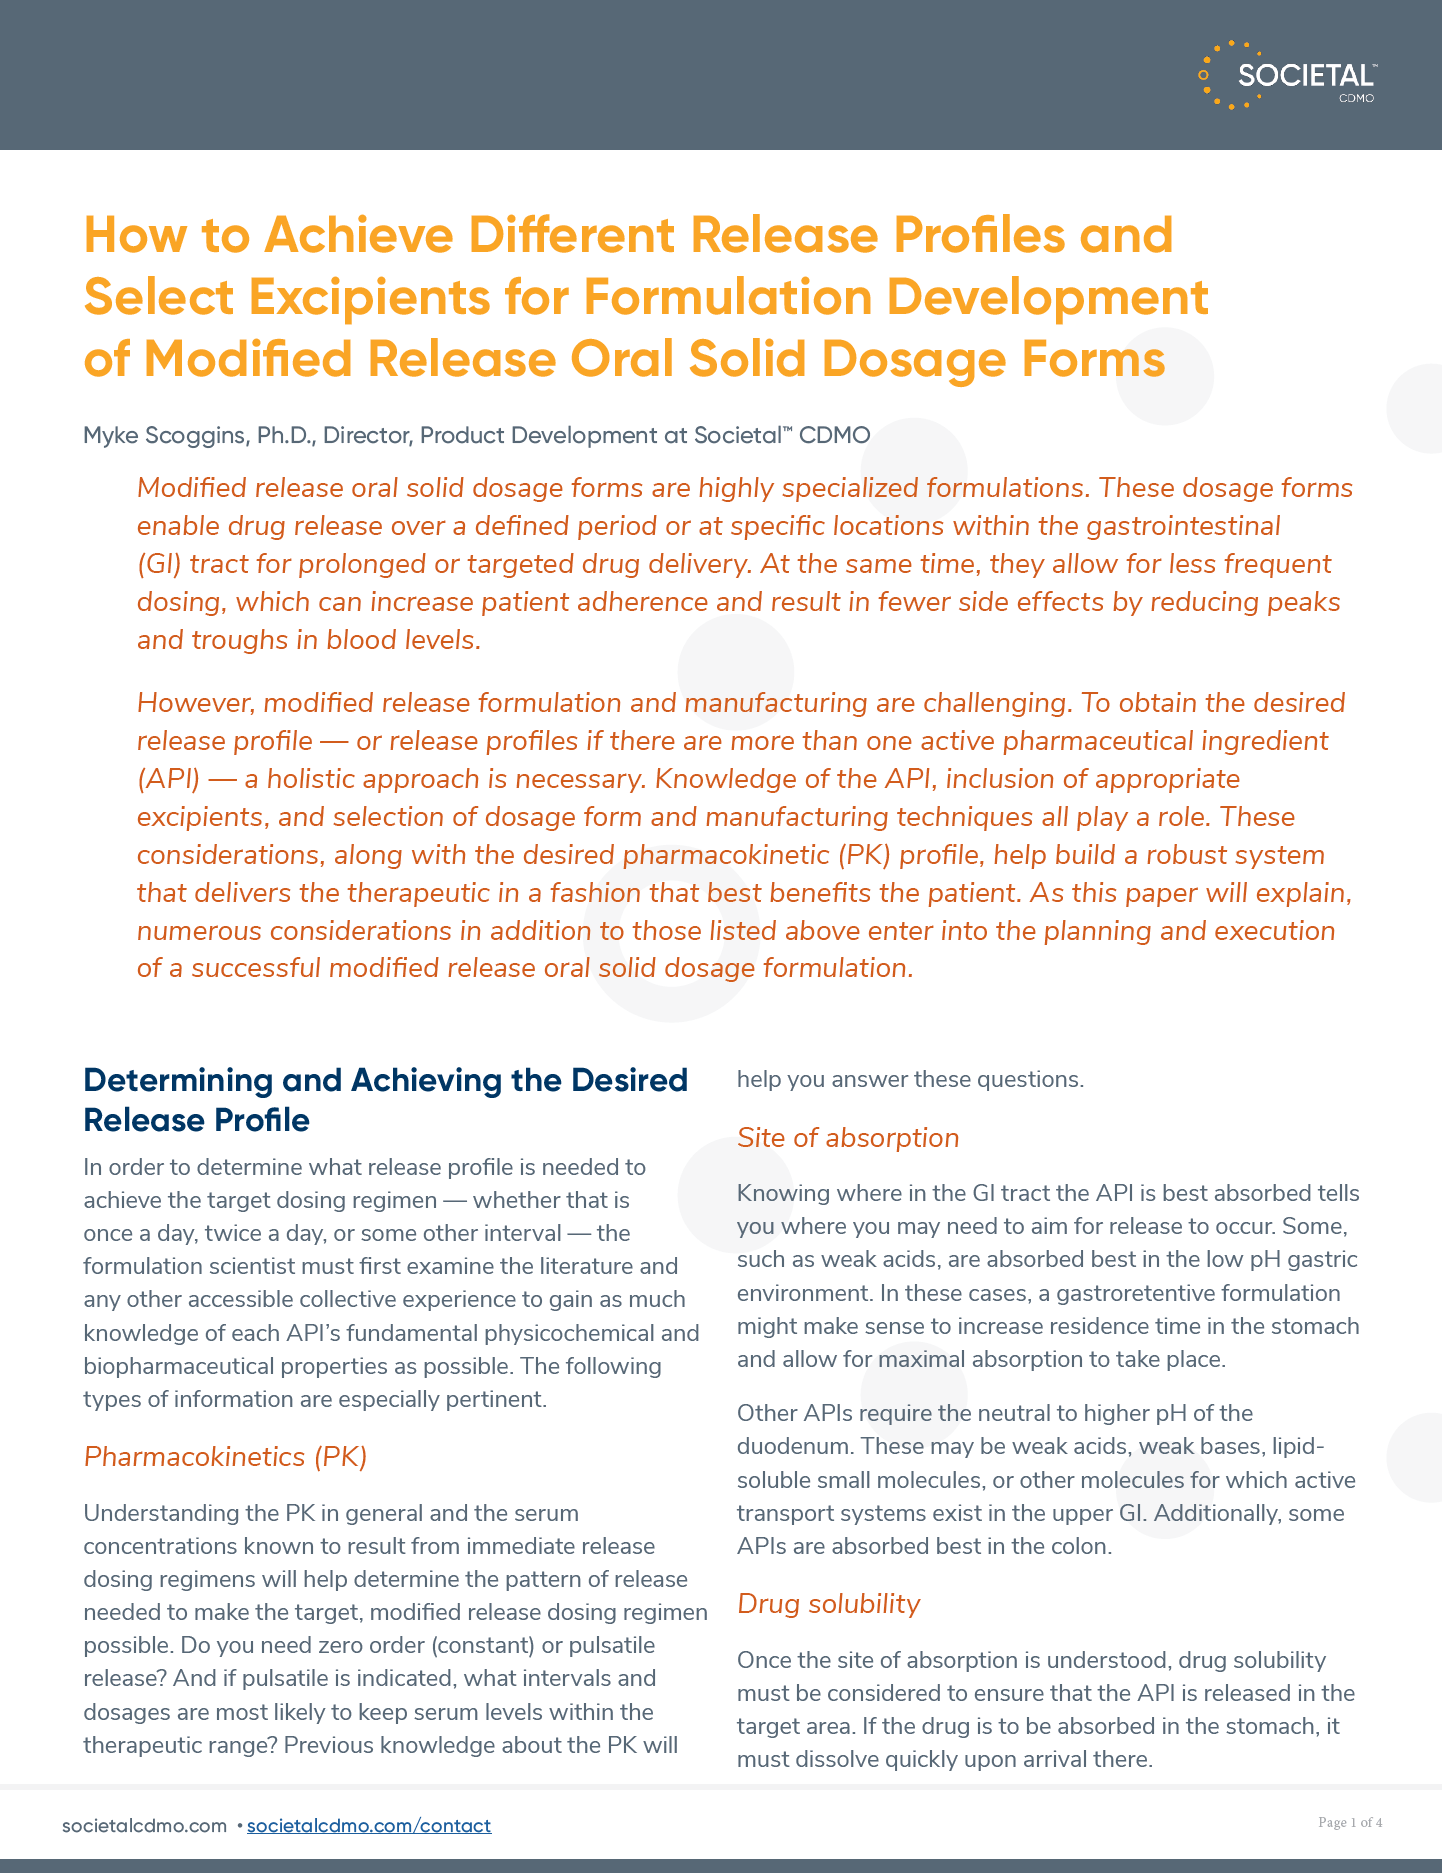 Formulation Development of Modified Release Oral Solid Dosage Forms White Paper